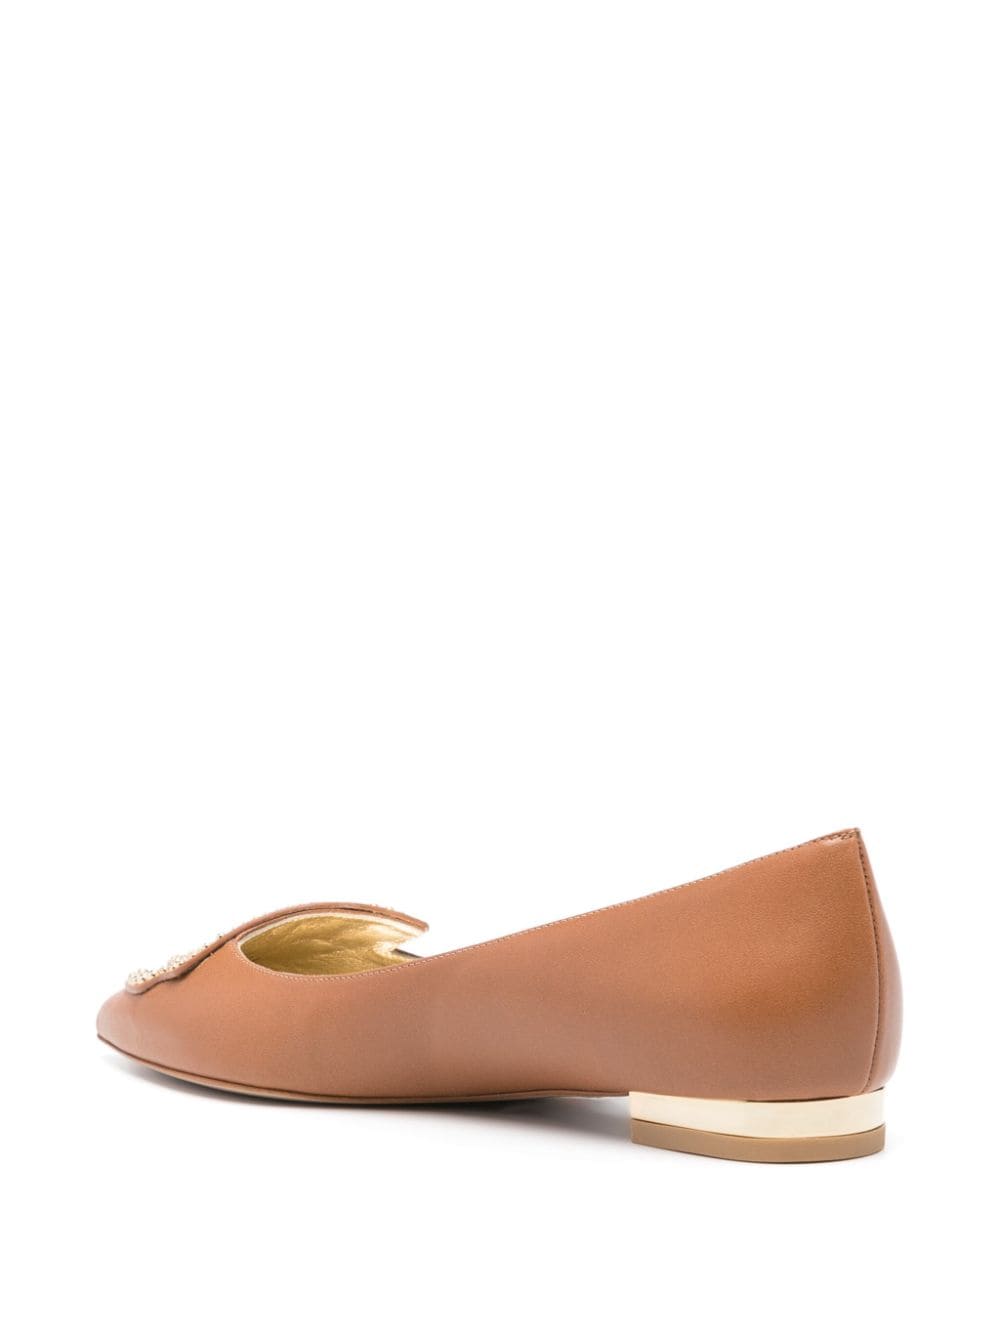 Shop Sophia Webster Butterfly Leather Ballerina Shoes In Brown